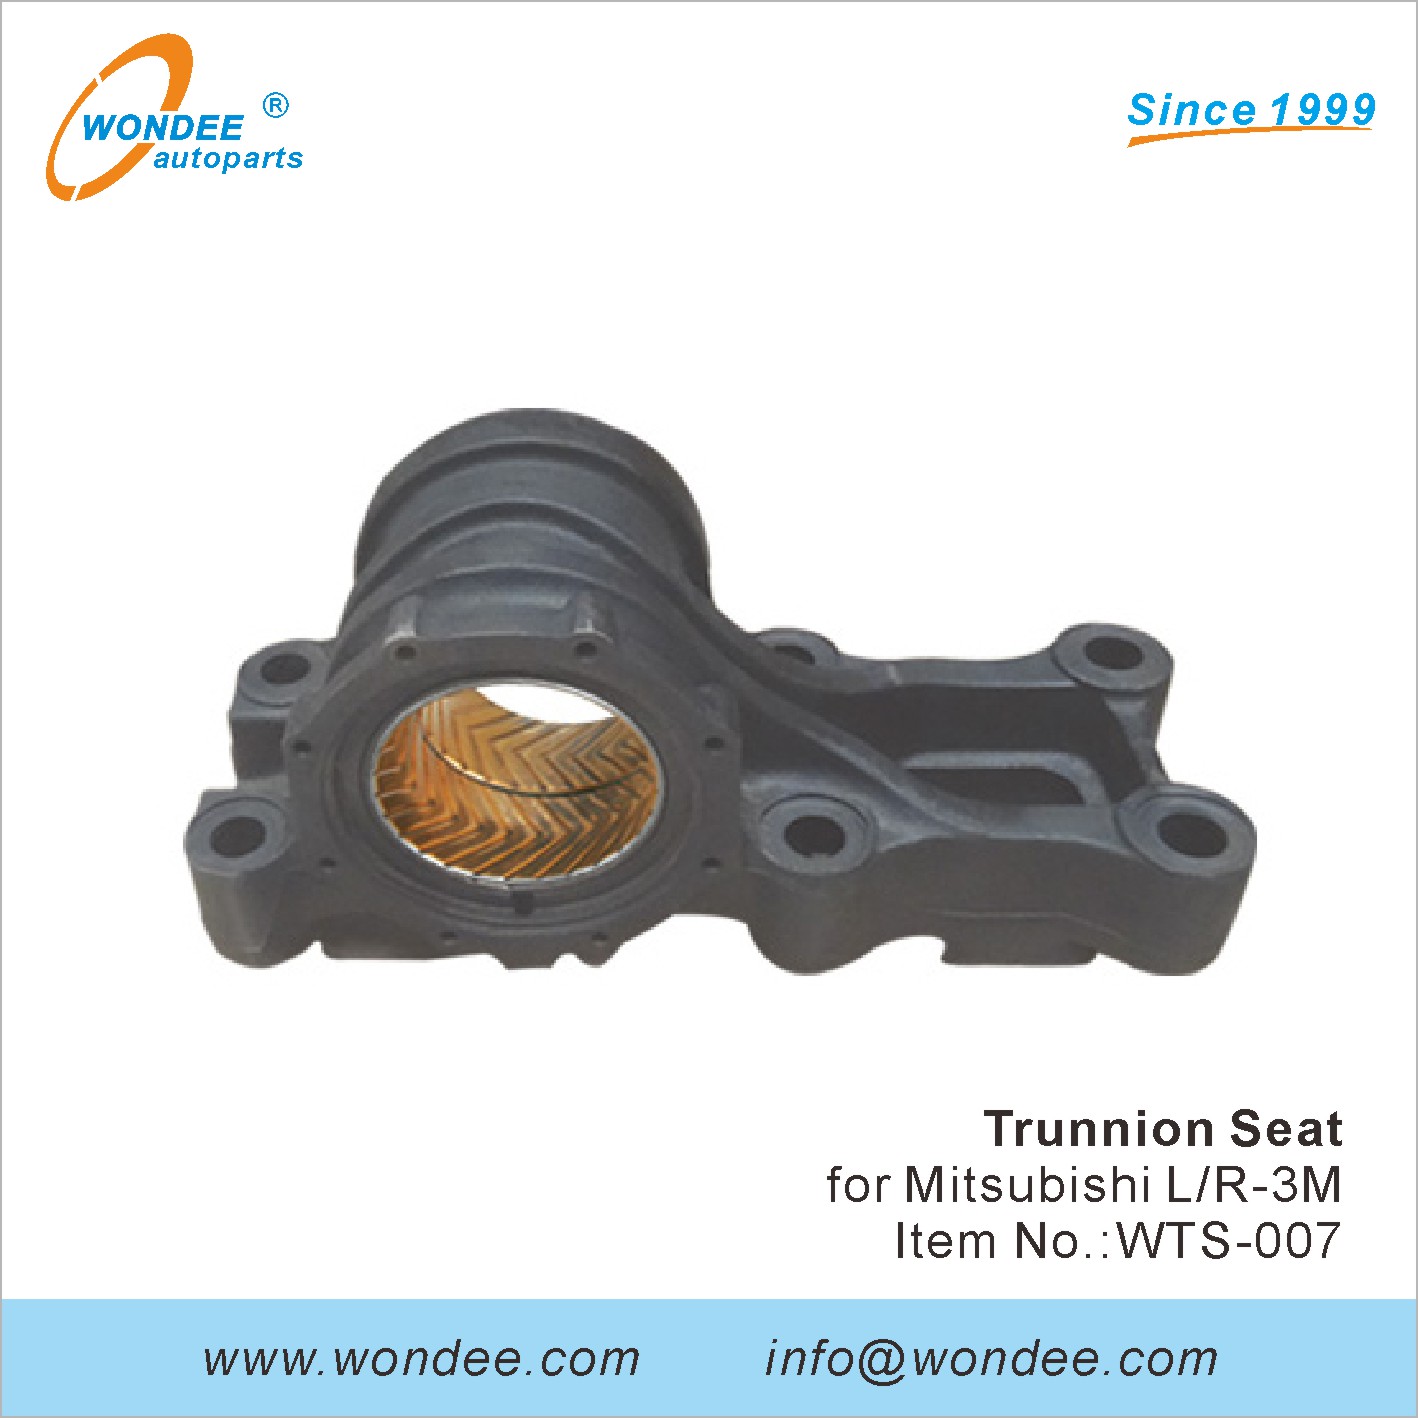 Trunnion Seats for Different Types of Trucks